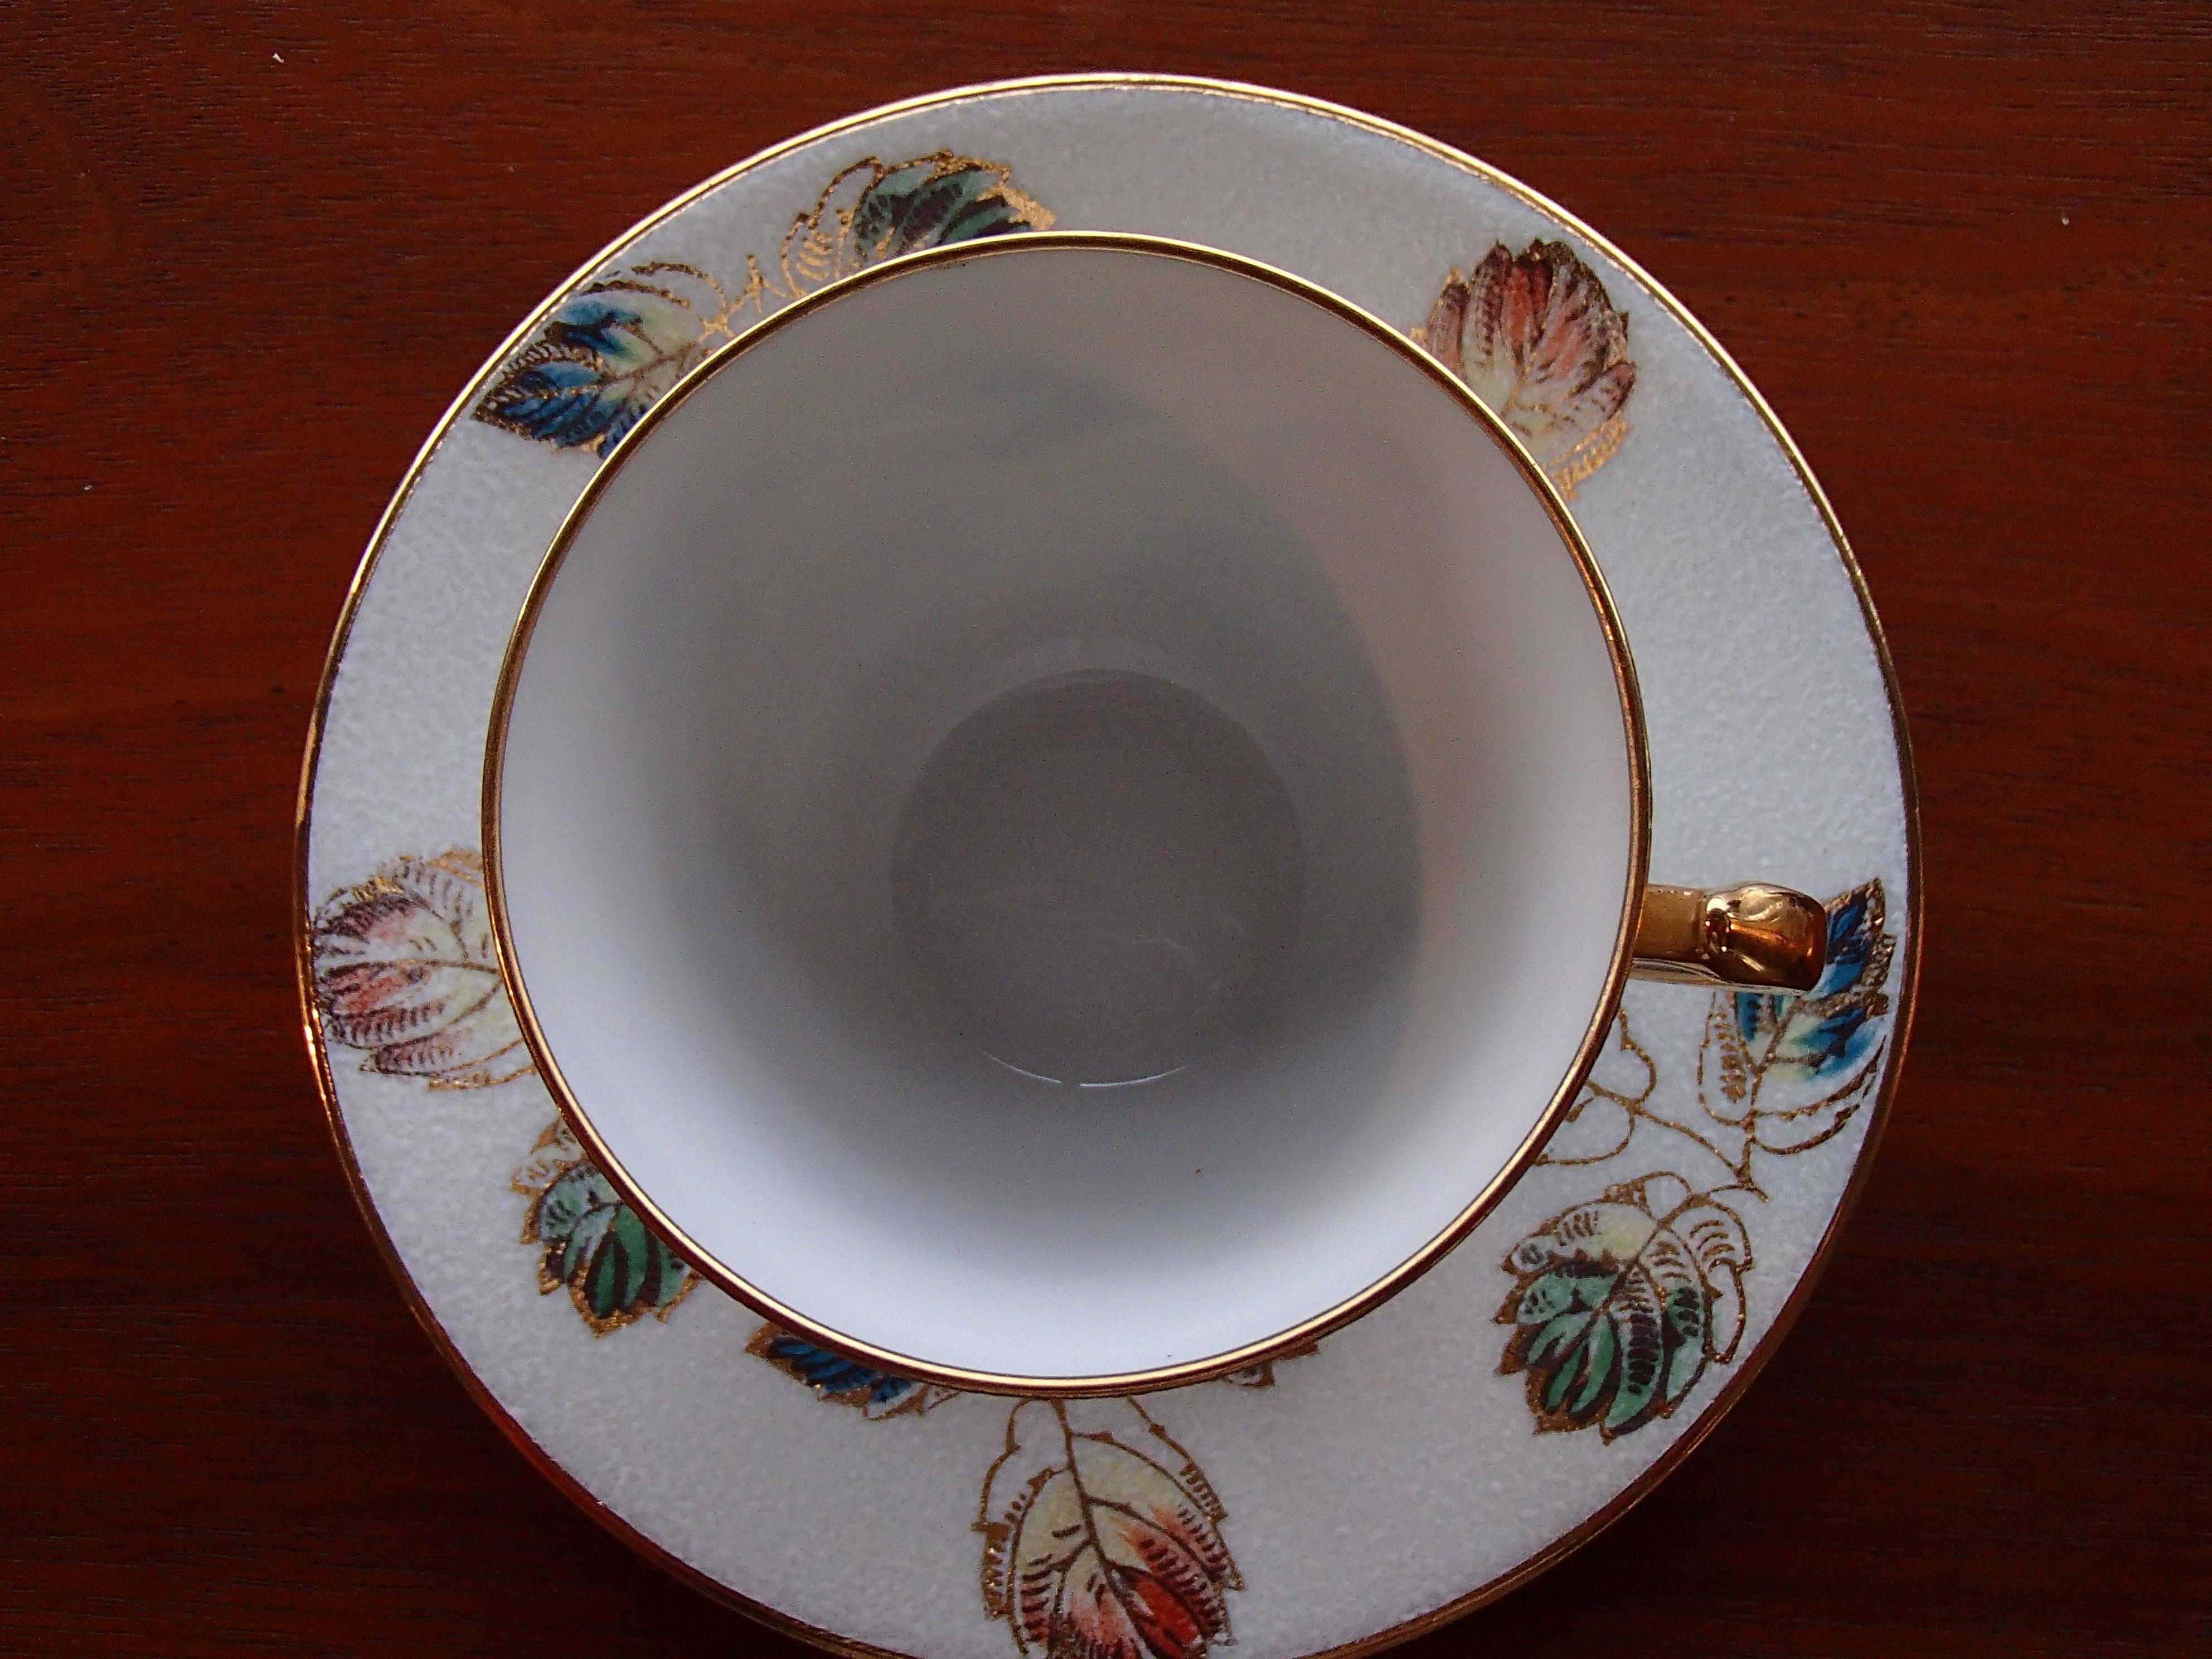 20th century Limoges hand-painted relief decor porcelain coffee cup by R.Leclair.